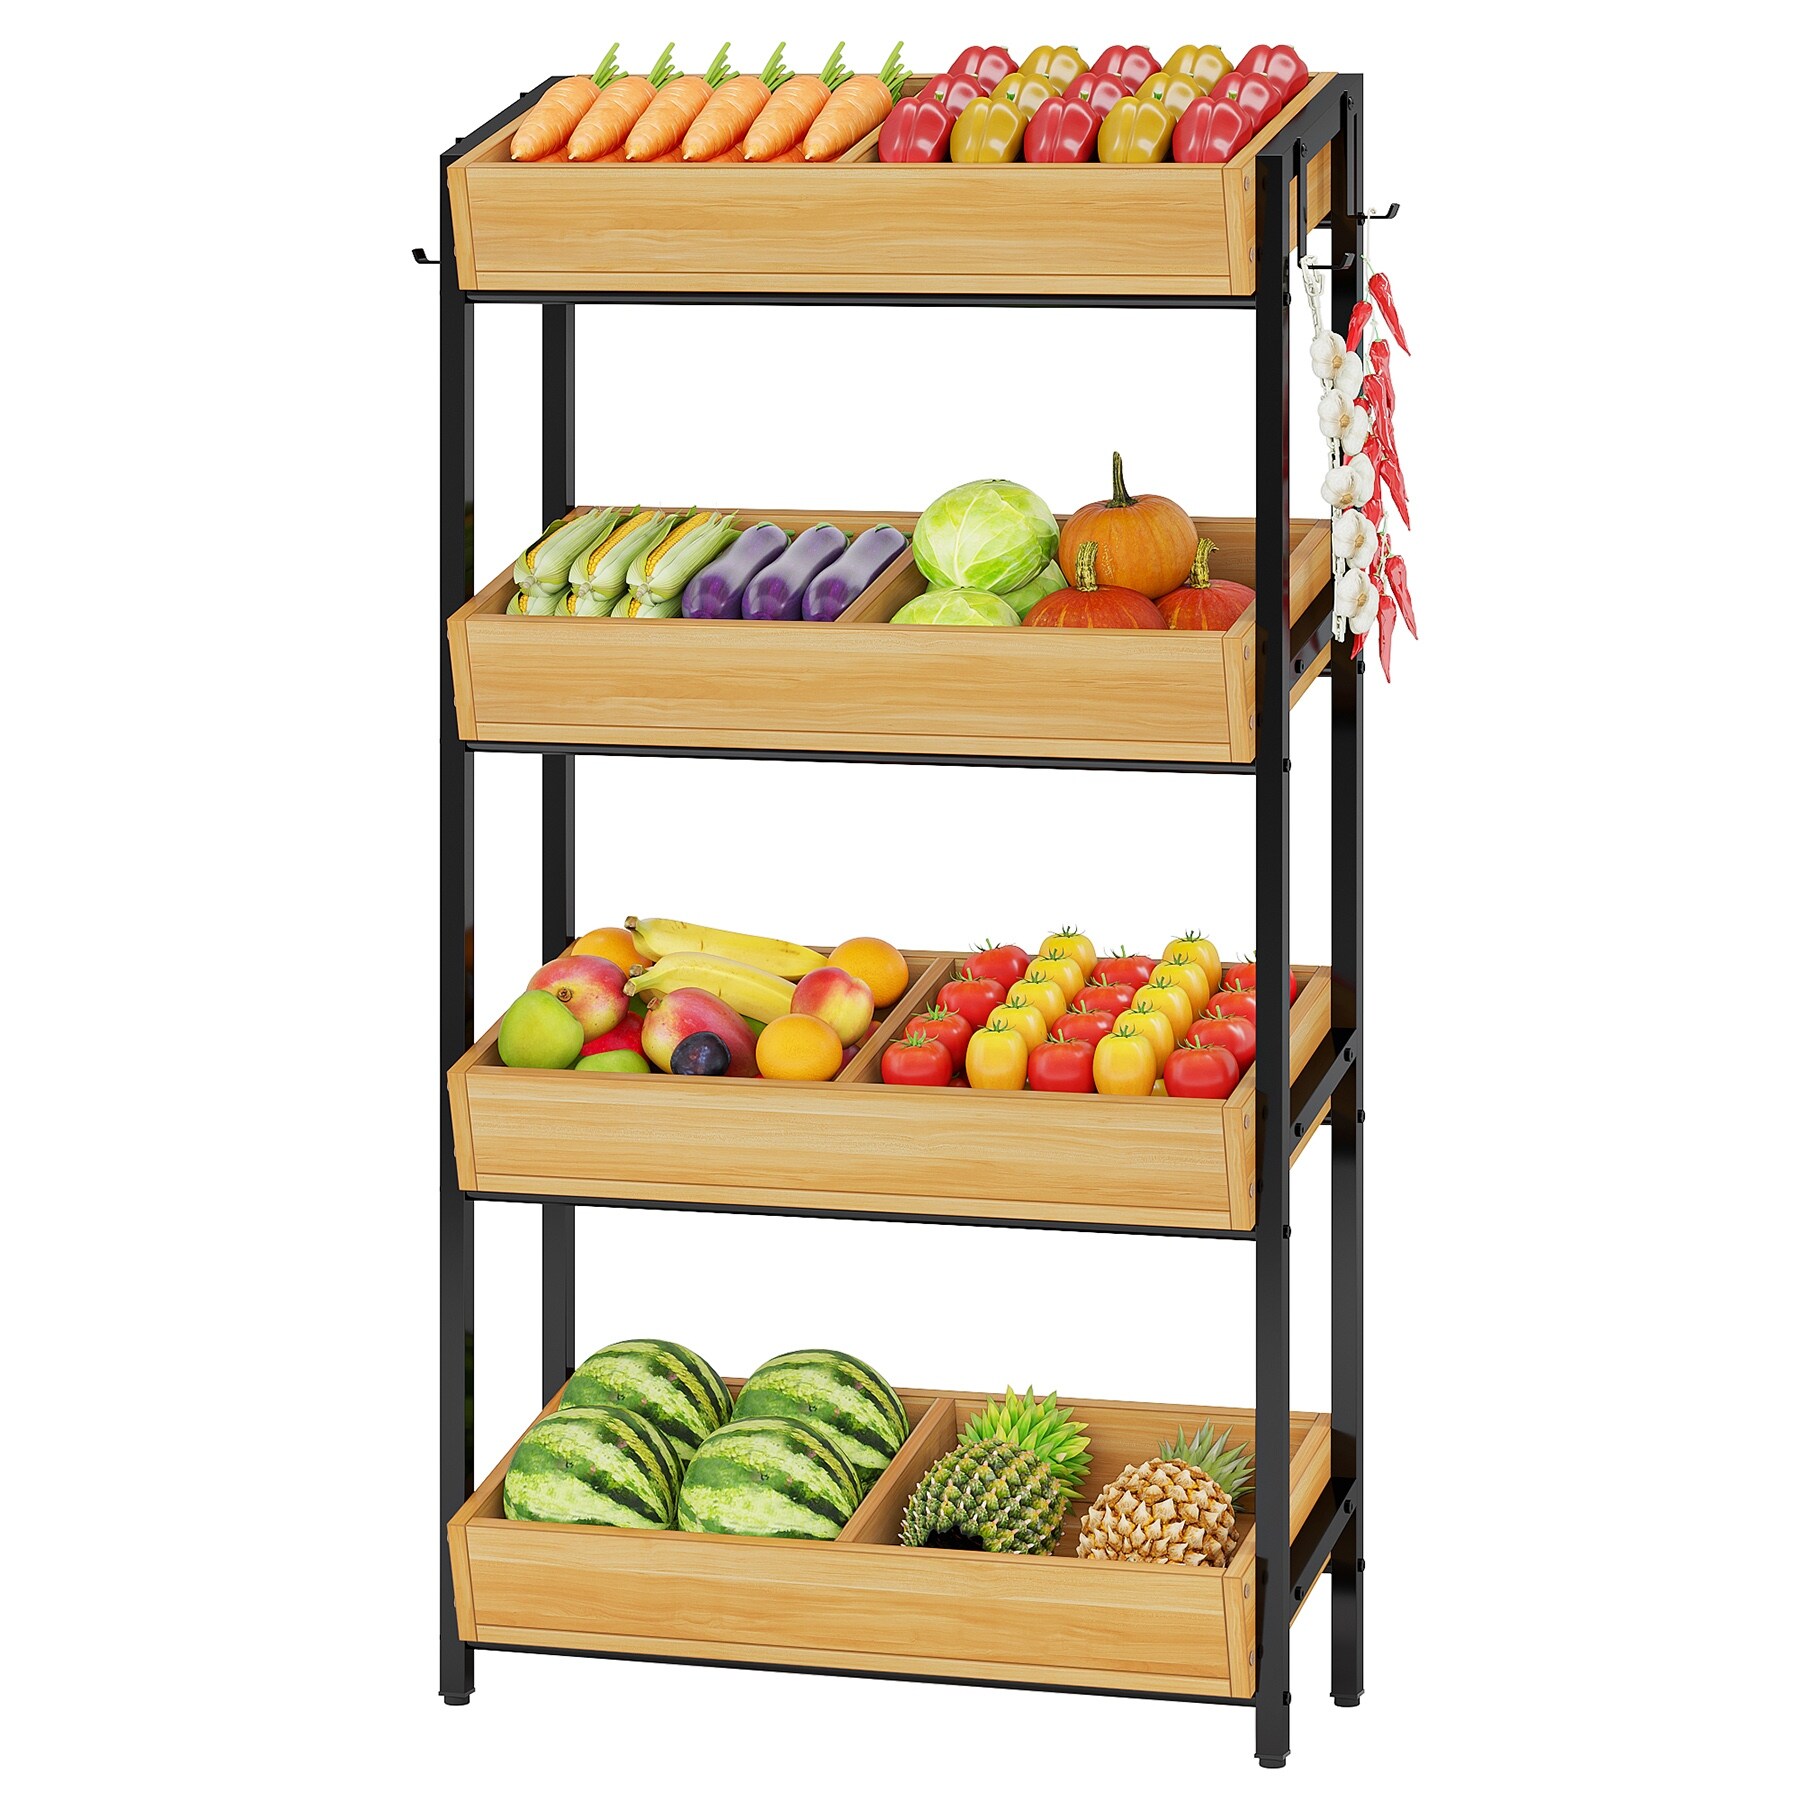 https://ak1.ostkcdn.com/images/products/is/images/direct/760a50c87c8e3b8fff2f746a2ba4117c3d0bd993/Industrial-4-Tier-Vegetable-and-Fruit-Storage-Rack-Stand%2CPotato-and-Onion-Bin-with-Storage%2CWood-Shelf-Unit-Snack-Stand.jpg